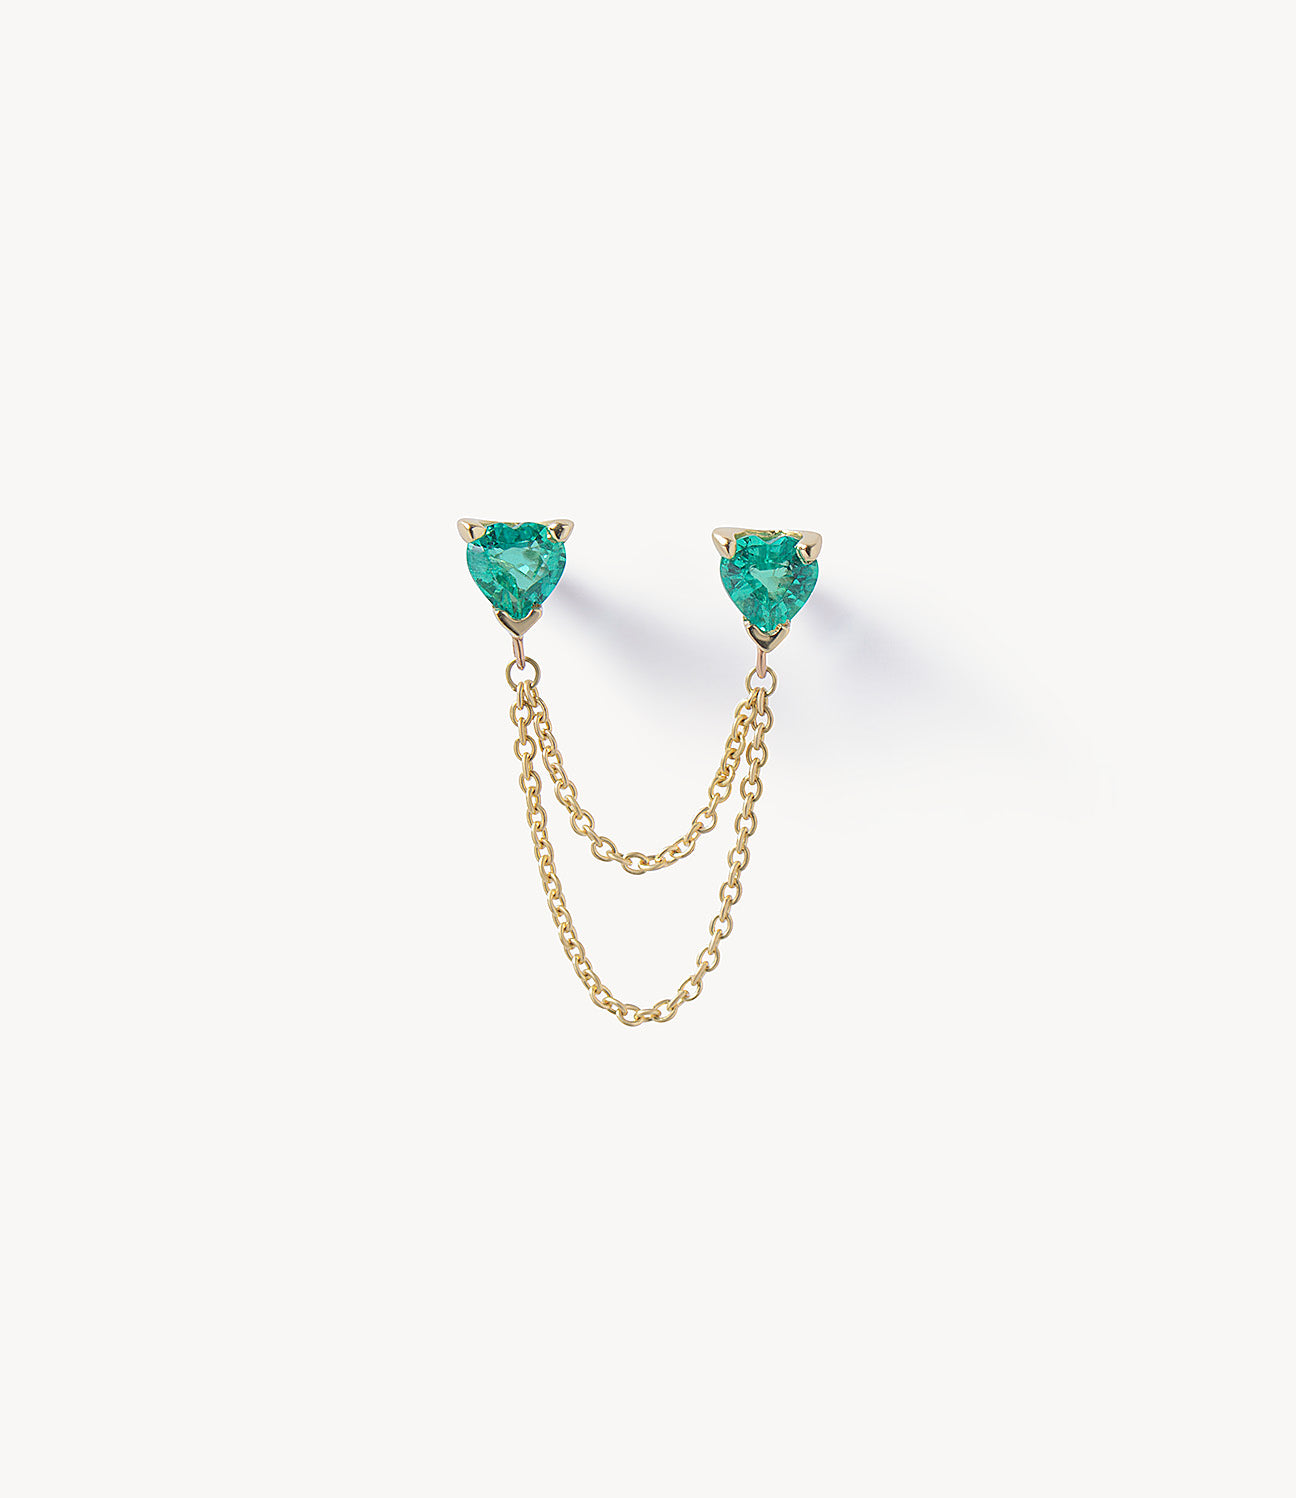 Double Emerald Heart Stud Earrings with Chain